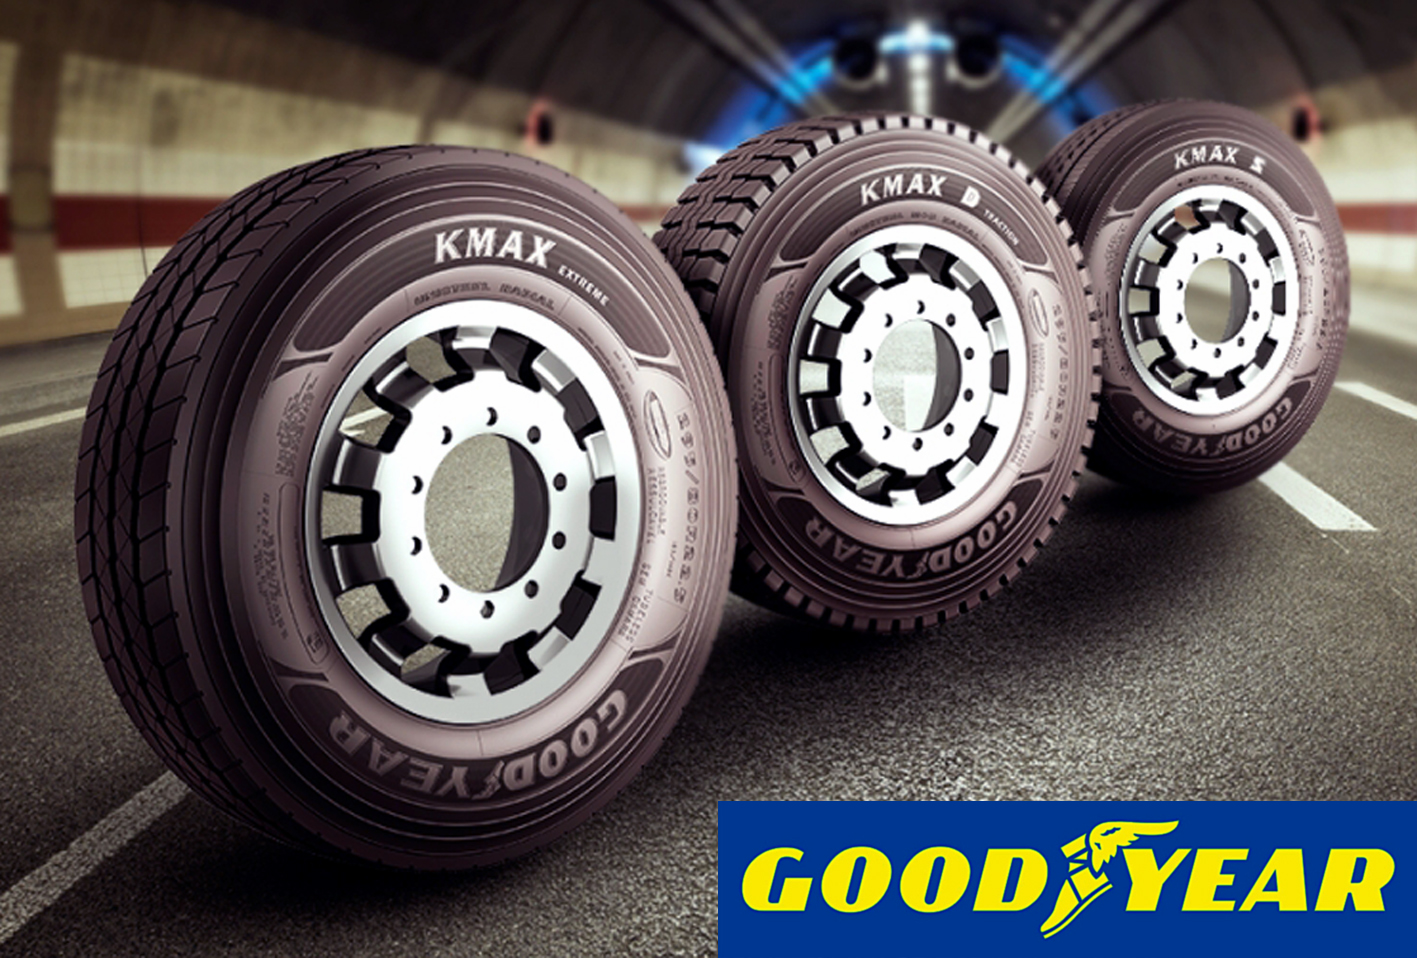 Goodyear Launches KMAX EXTREME Truck Tire Line